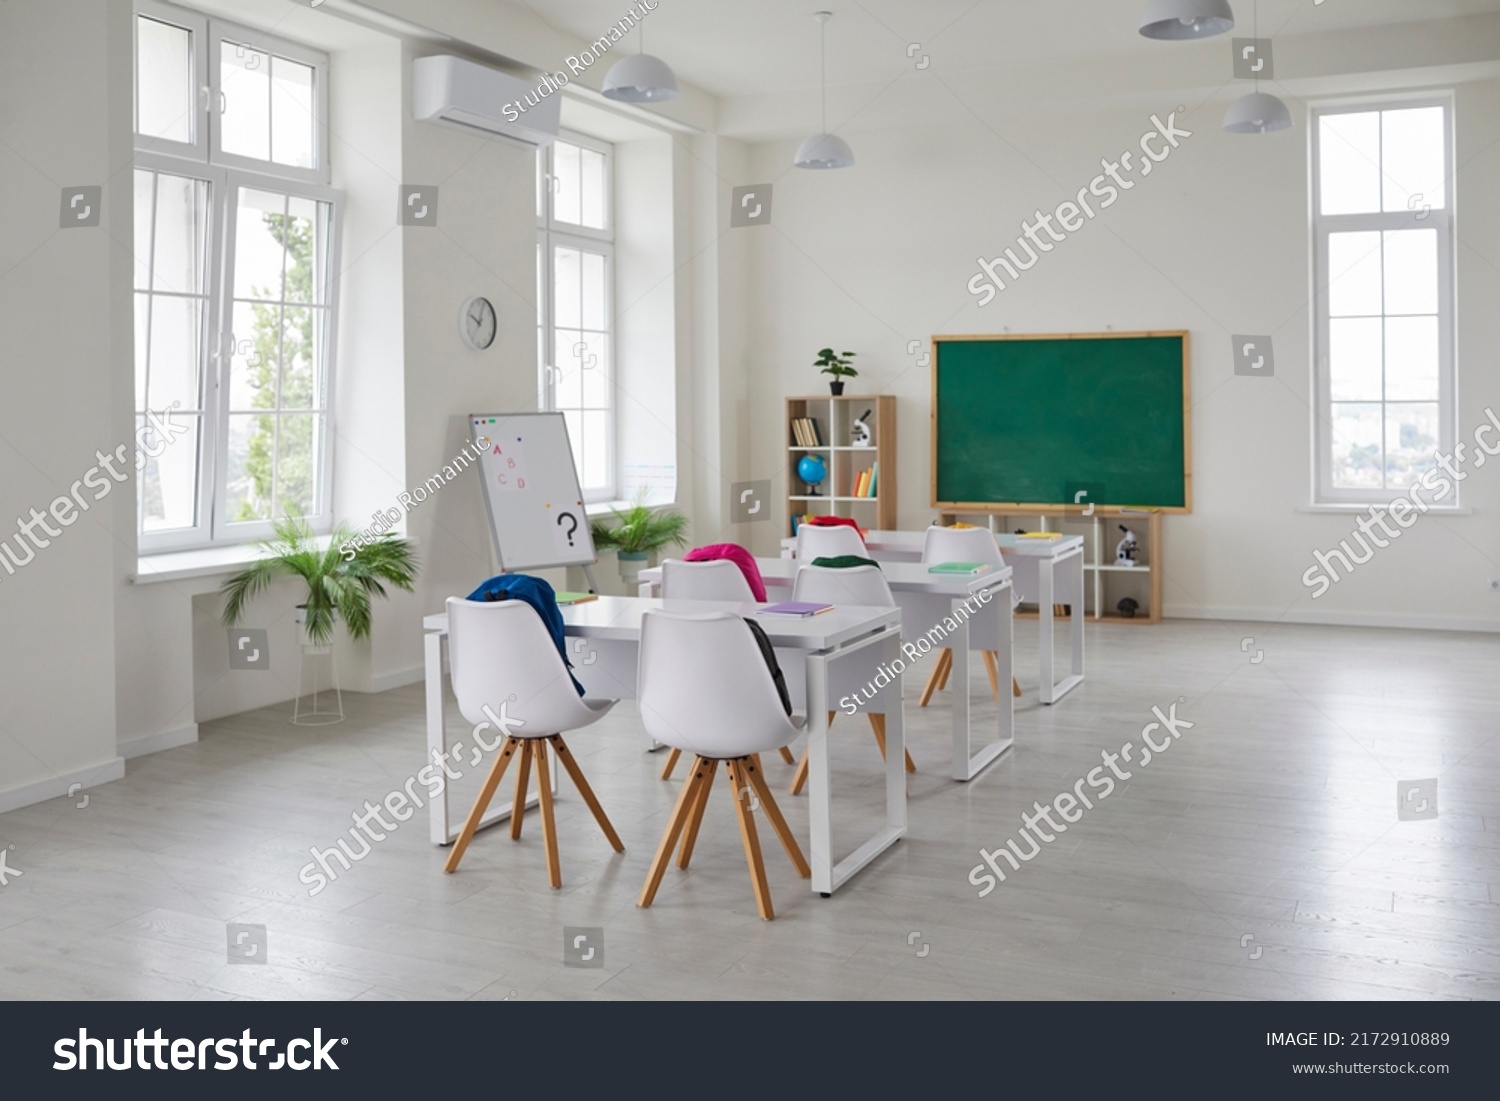 Classroom school.Interior of clean spacious classroom ready for new school year. Empty room with white walls, comfortable desks, chairs, green blackboard, whiteboard. Back to school. #2172910889